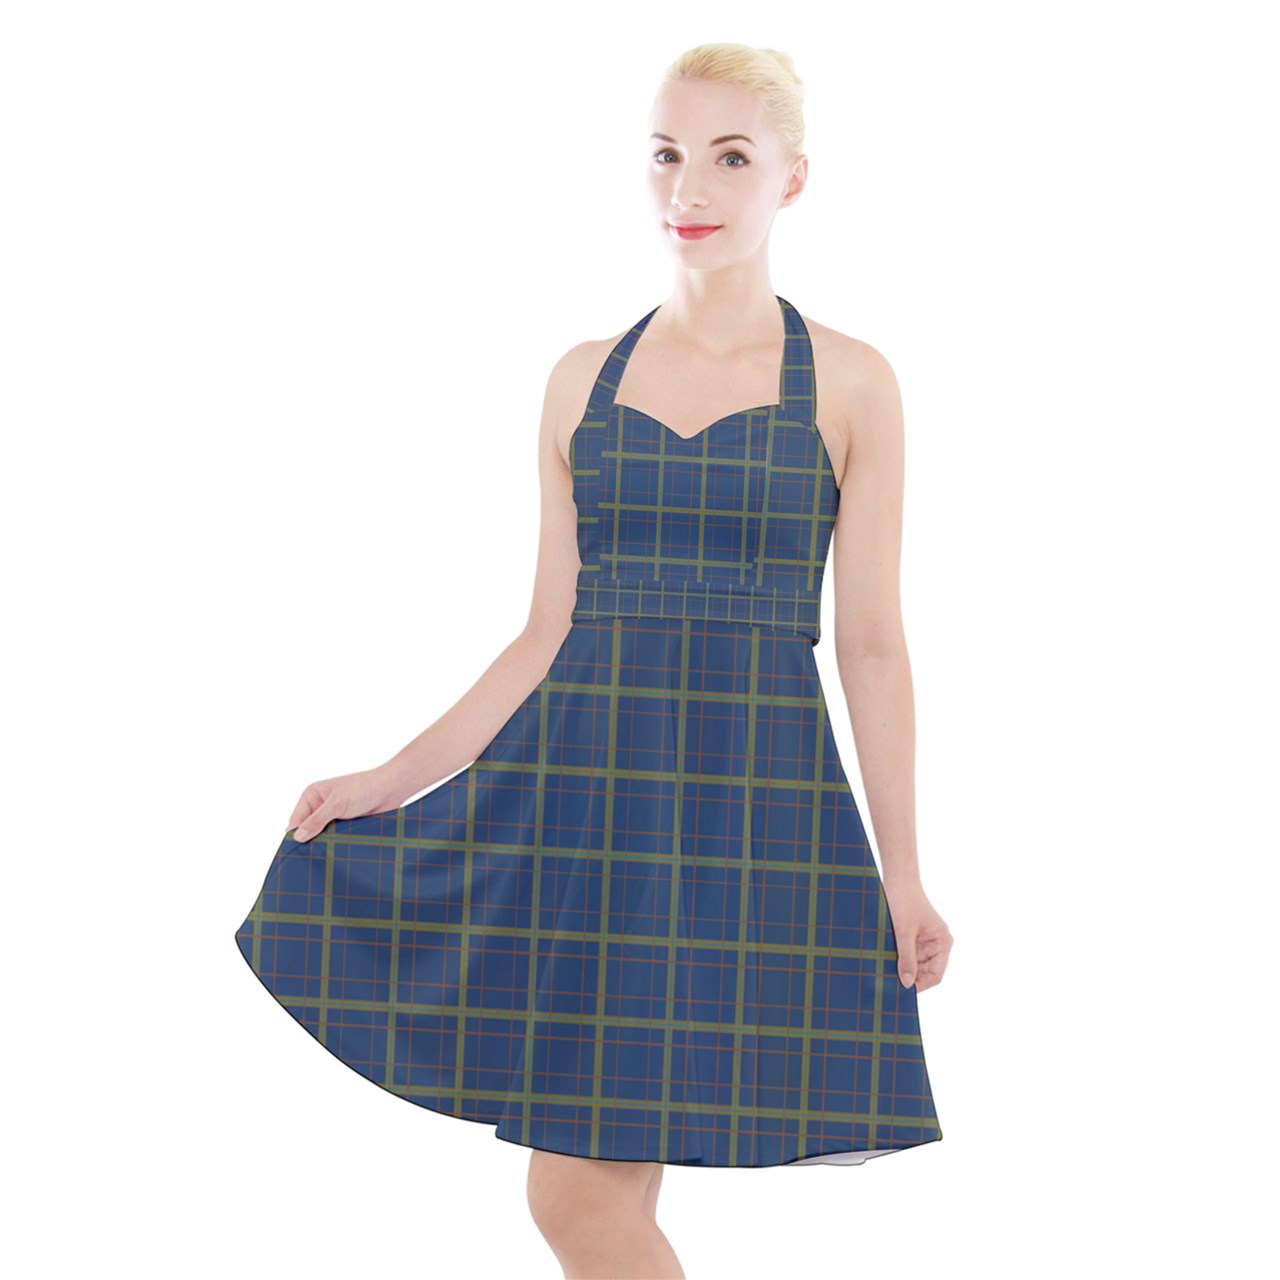 Sadie Hawkins: The Rockabilly Collection